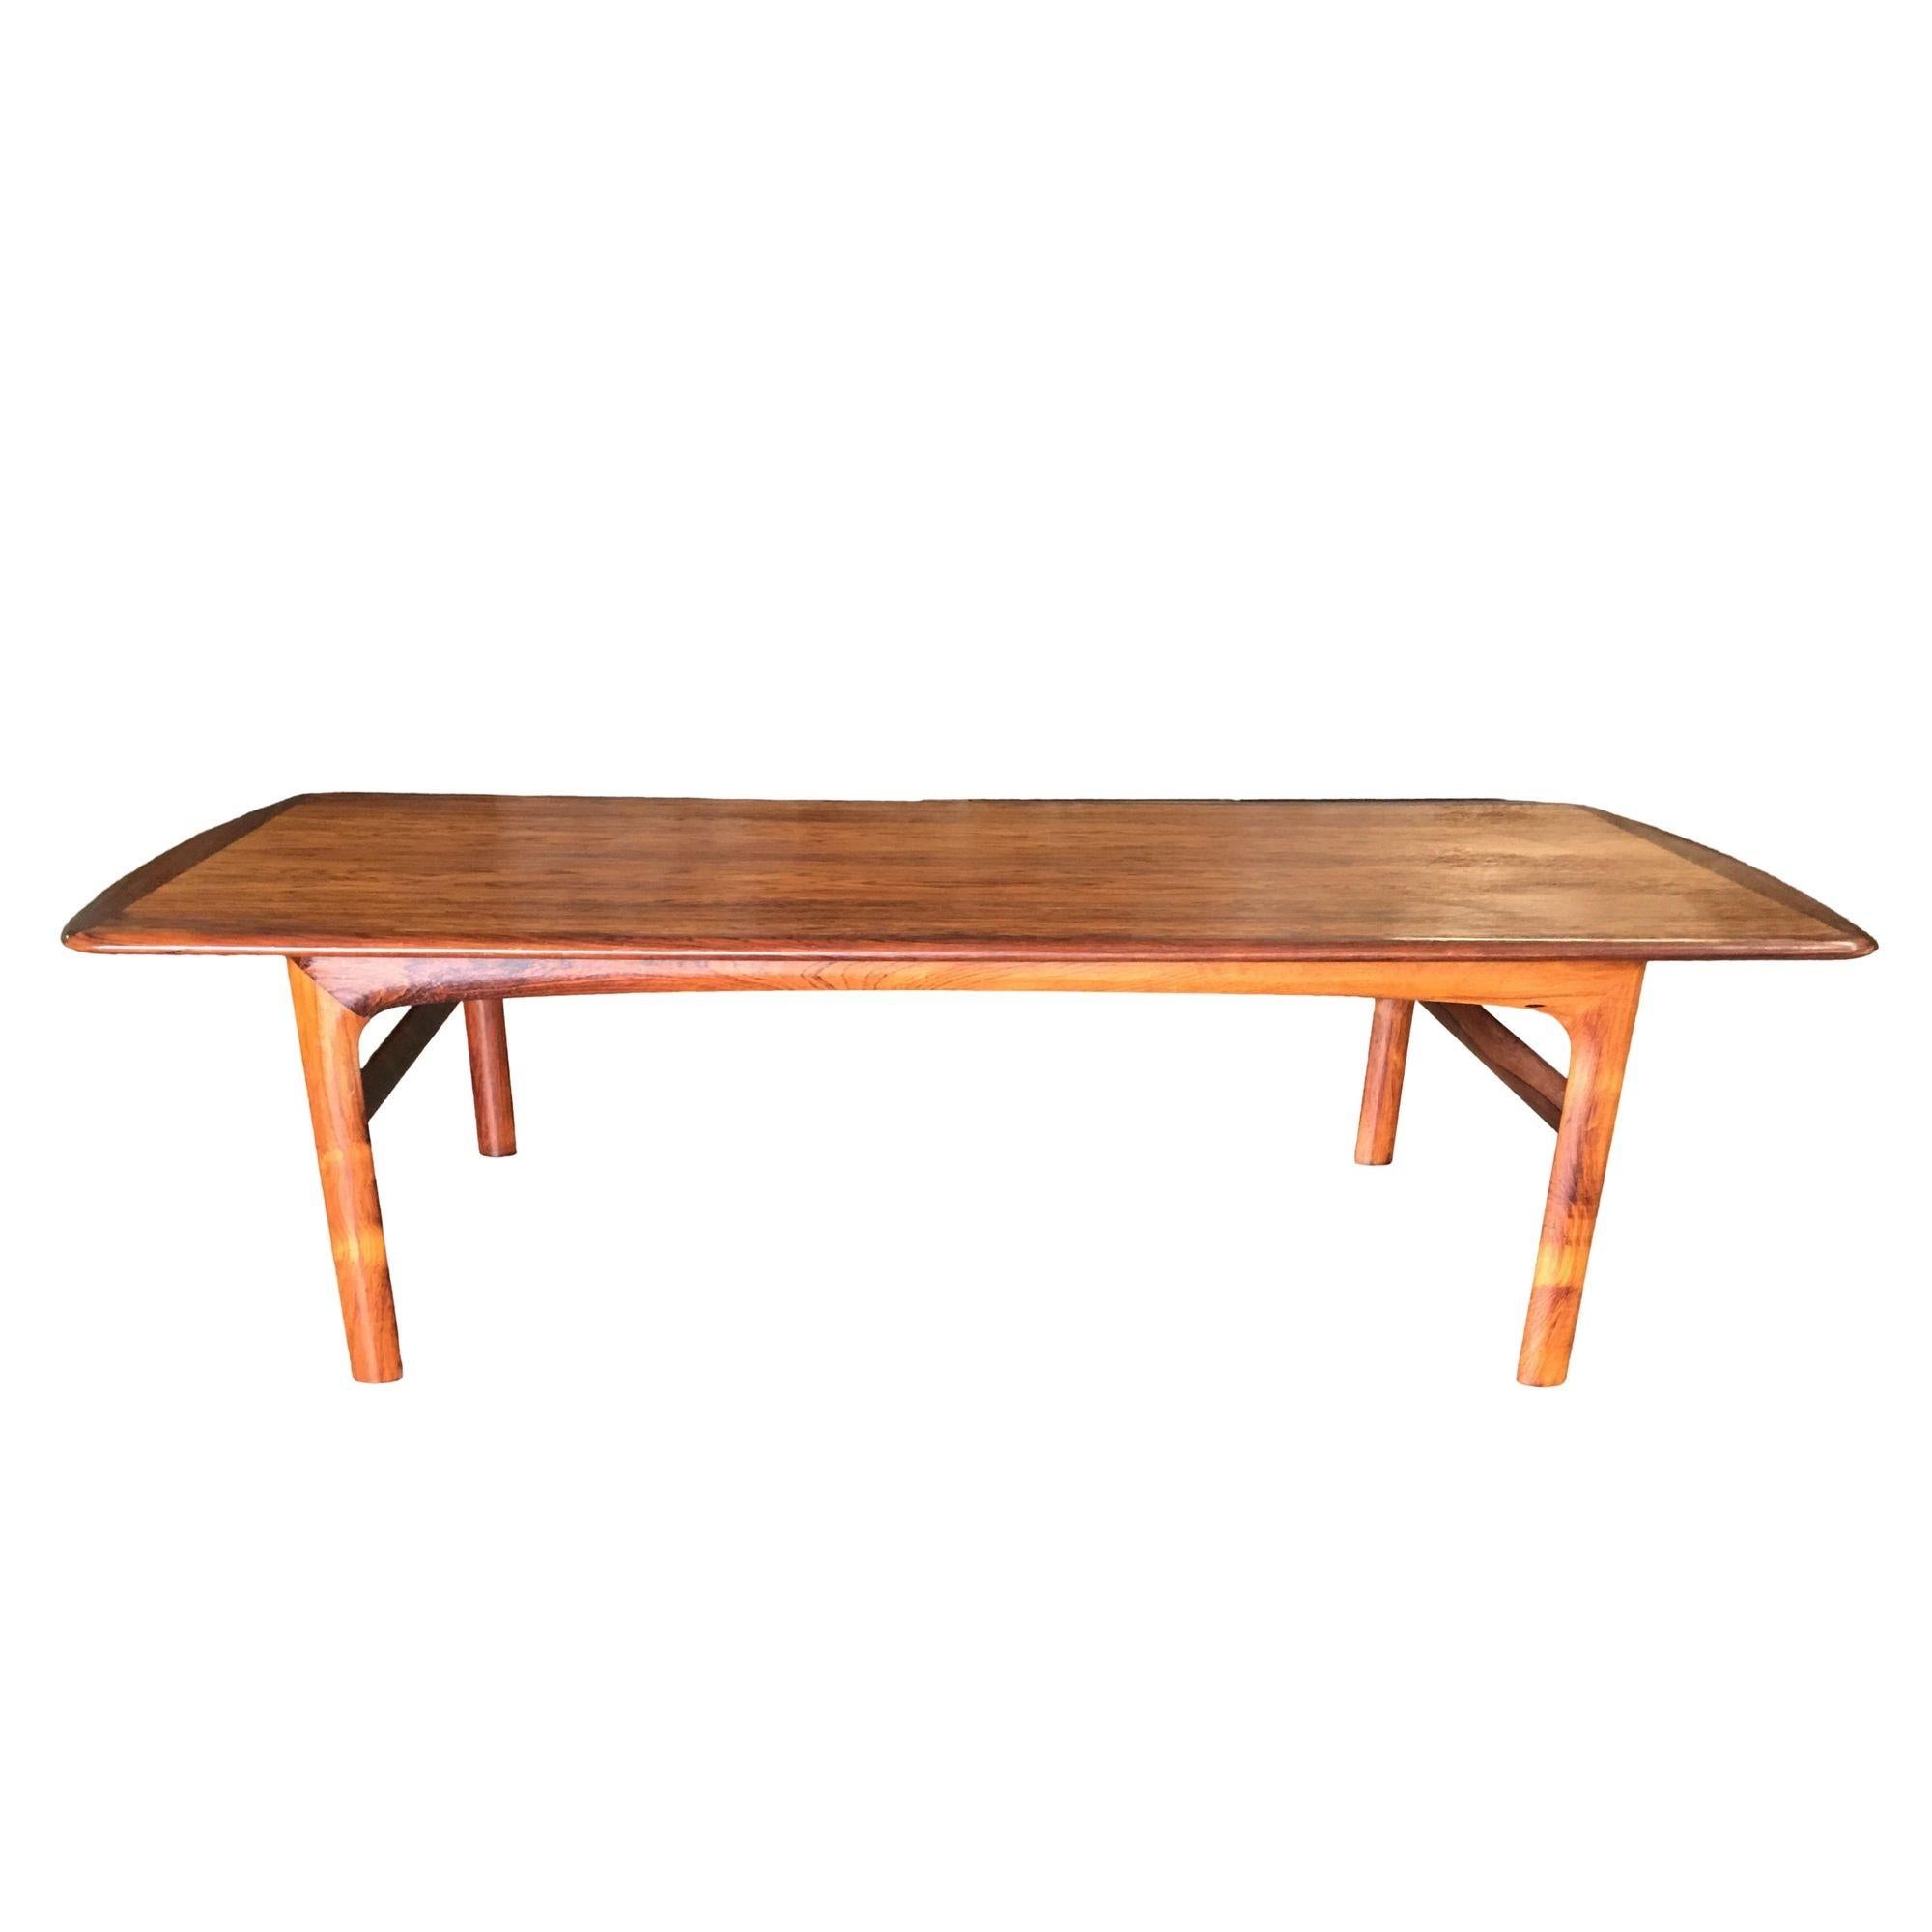 Swedish Mid Century modernist coffee table made from rosewood with inlay two-tone top by Folke Ohlsson.

This item includes restricted materials and can not be sold outside of the contiguous United States.